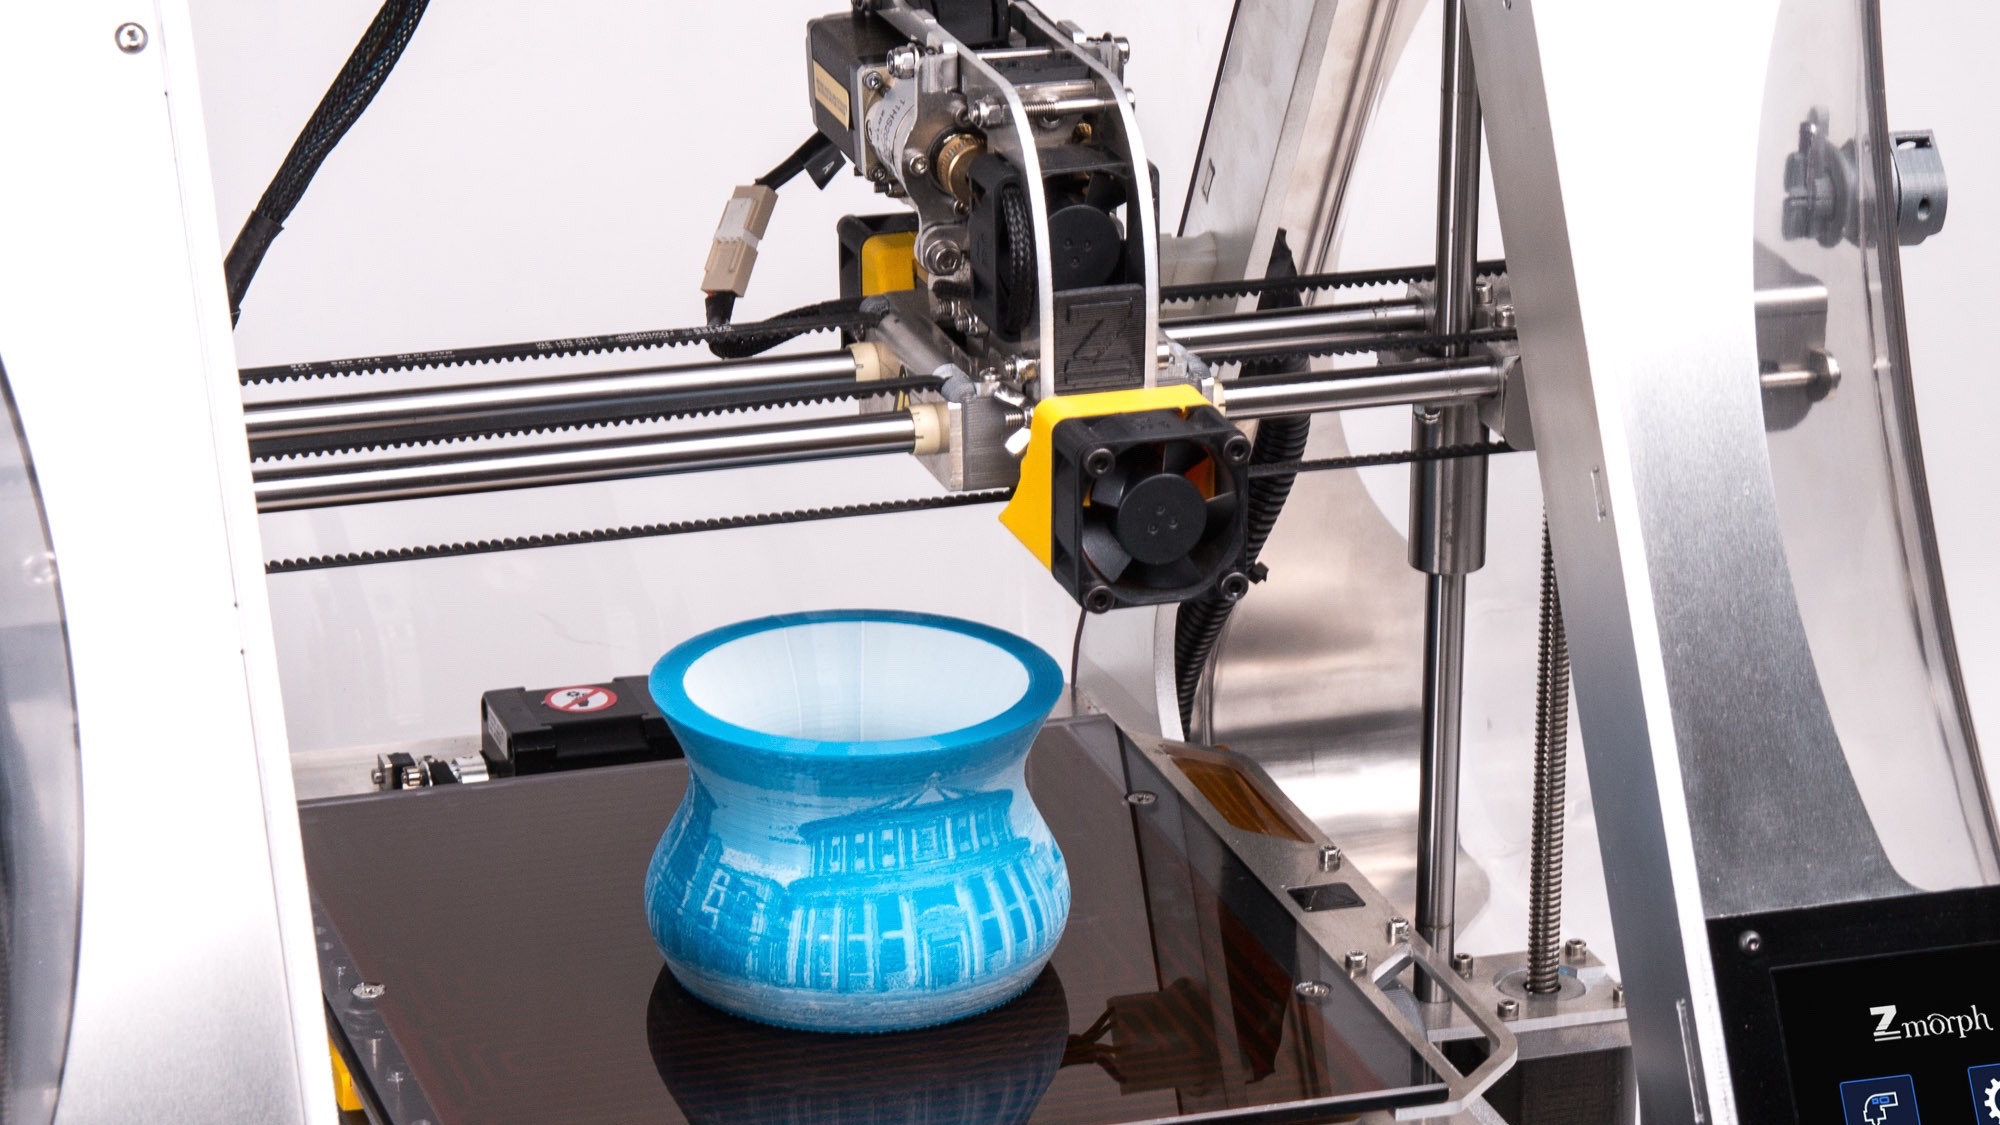 How to get started in 3D printing TechRadar